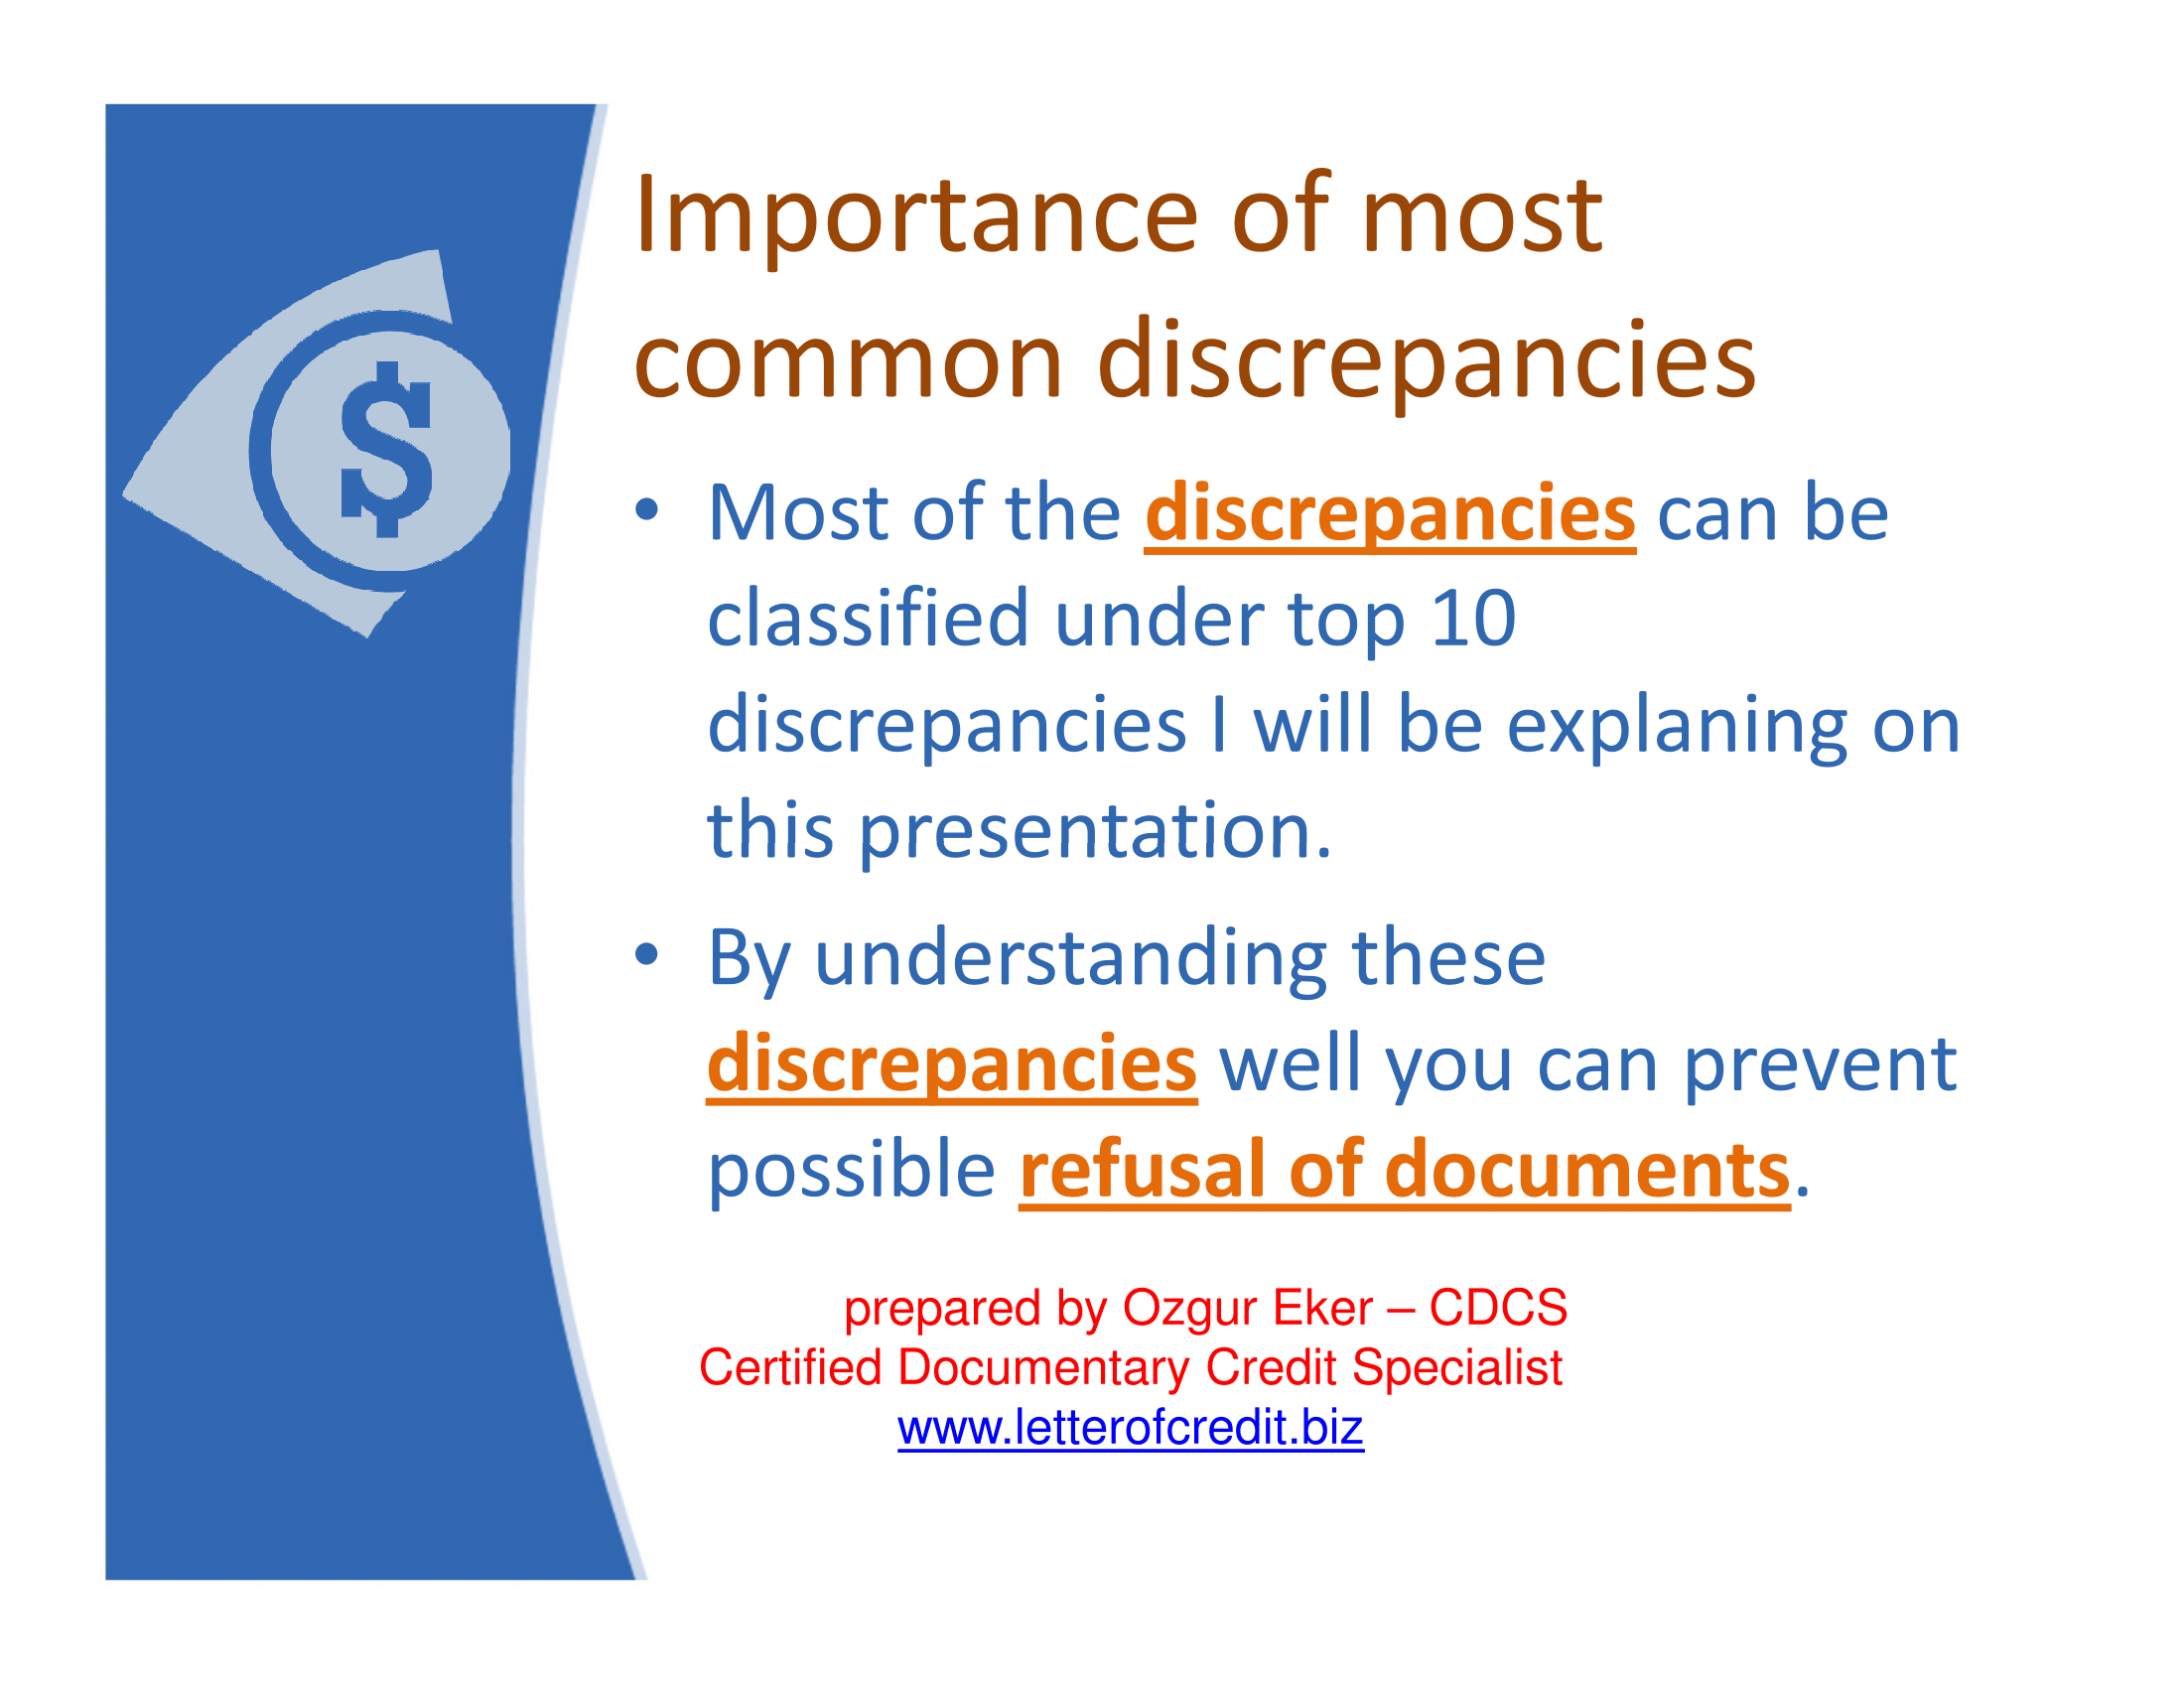 Importance of most common discrepancies